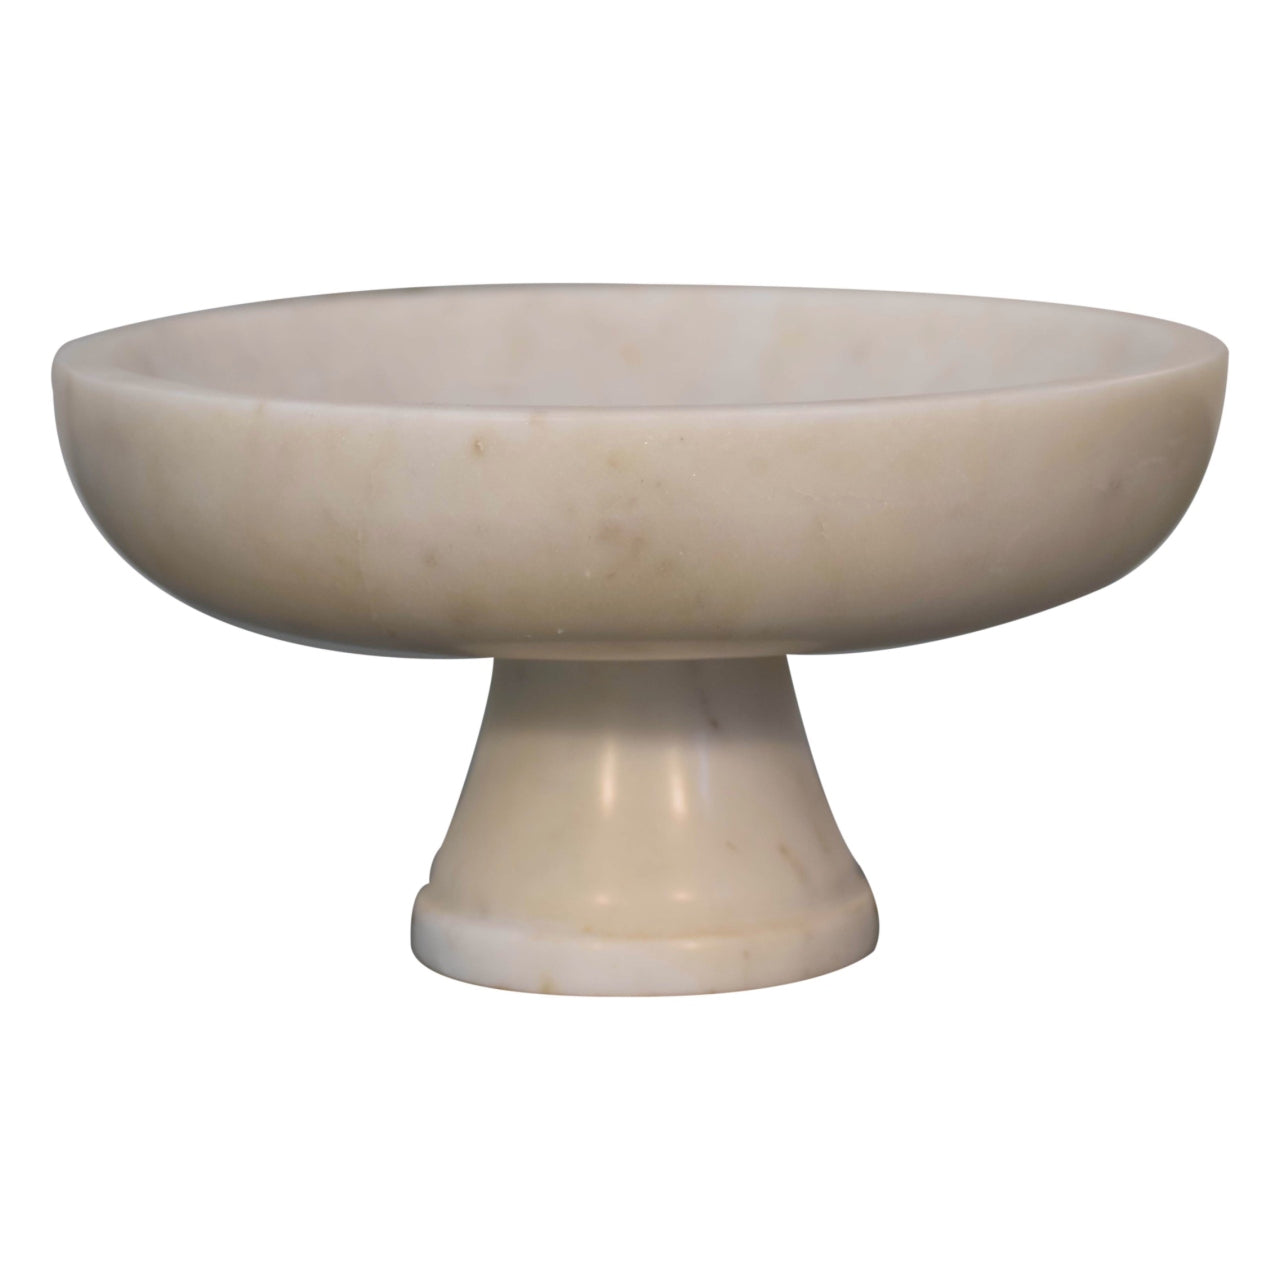 View White Marble Fruit Bowl information